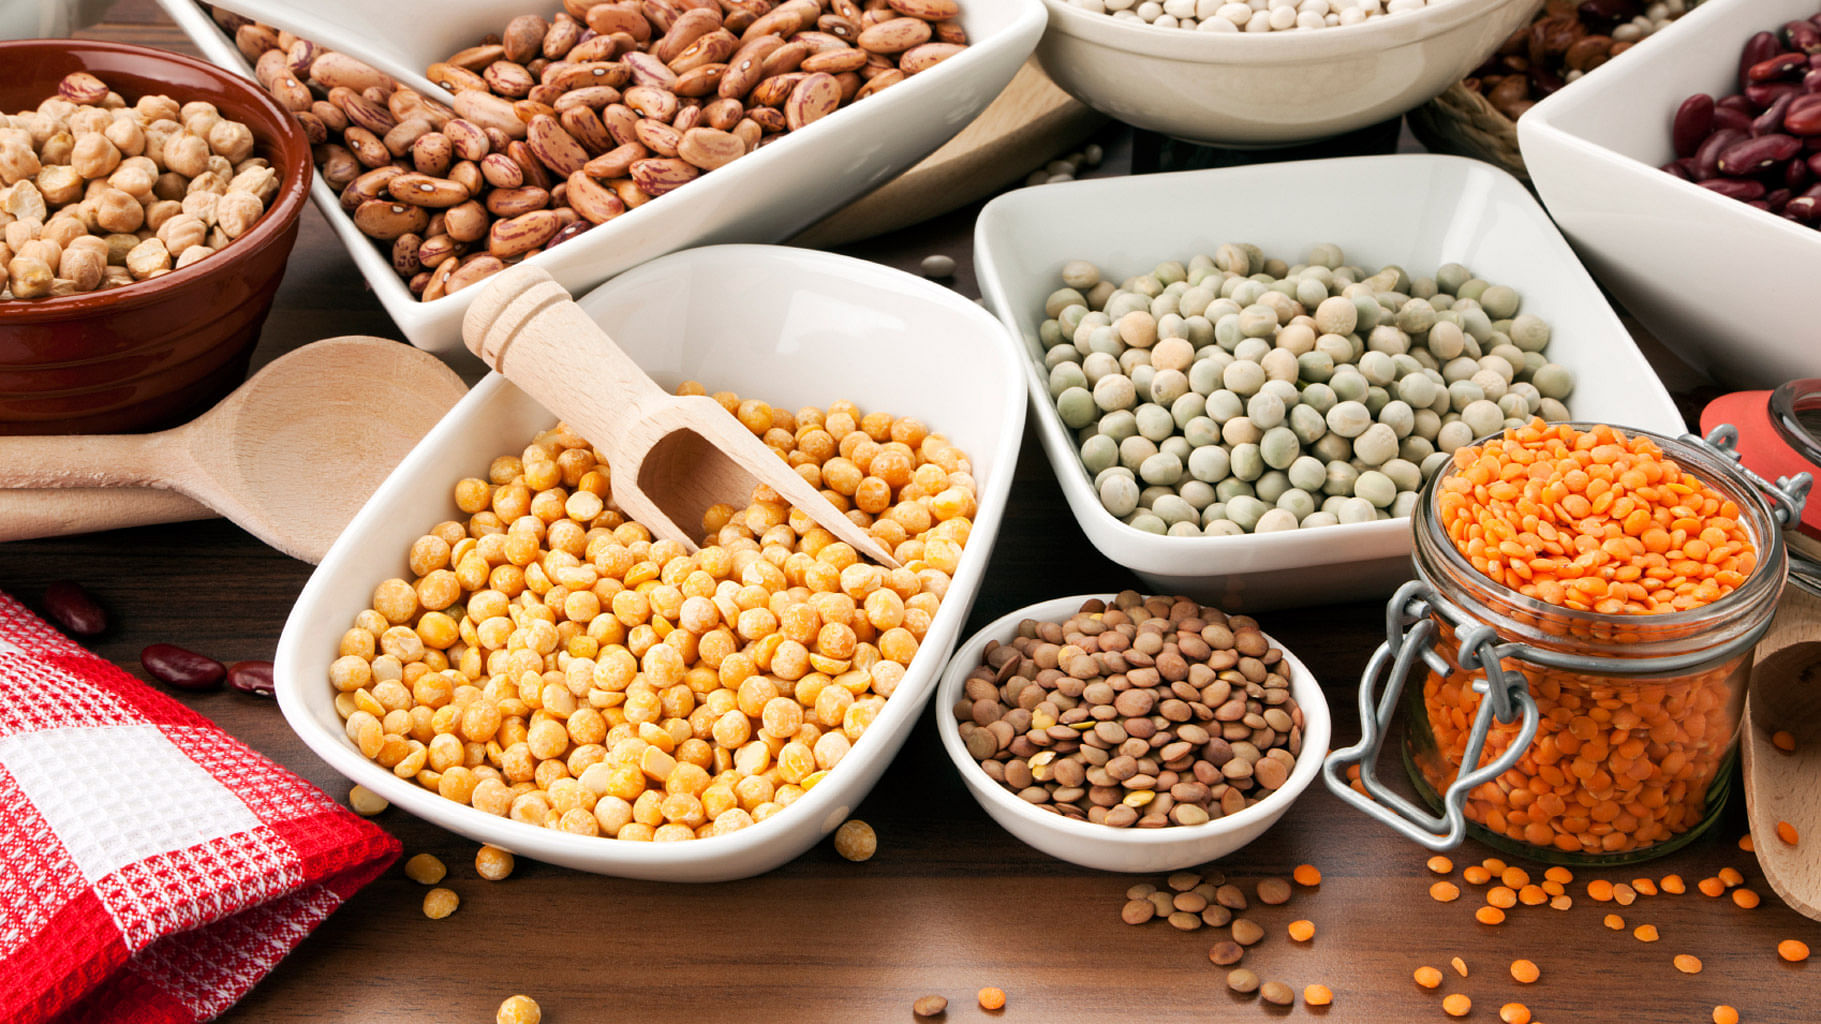 Food regulator, FSSAI, wants the ban on Khesari dal to go. Is it a good move considering the rise in the price of pulses in recent months? (Photo: iStockphoto)